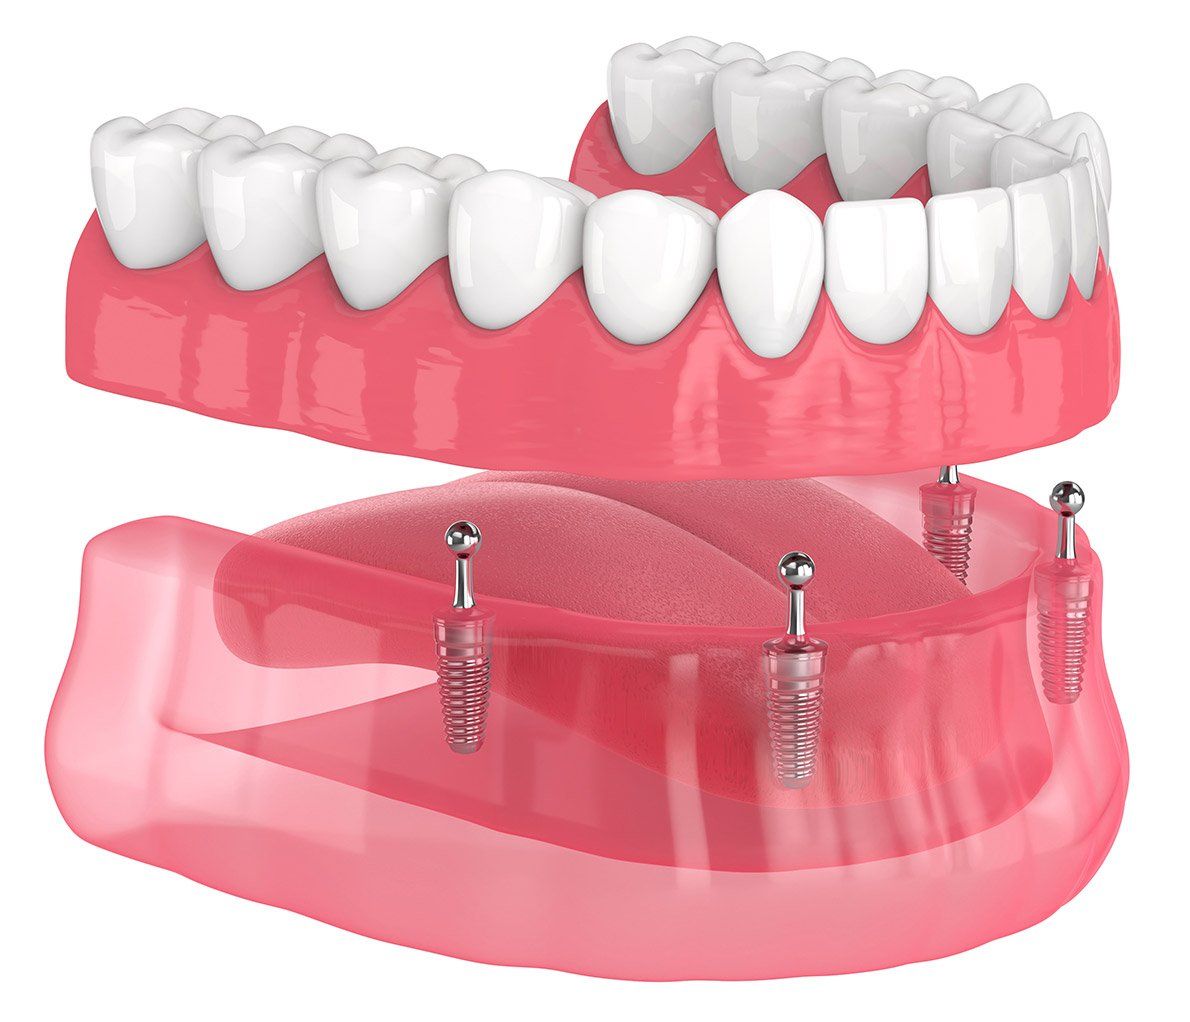 Implant-Supported Dentures in Owings Mills, MD